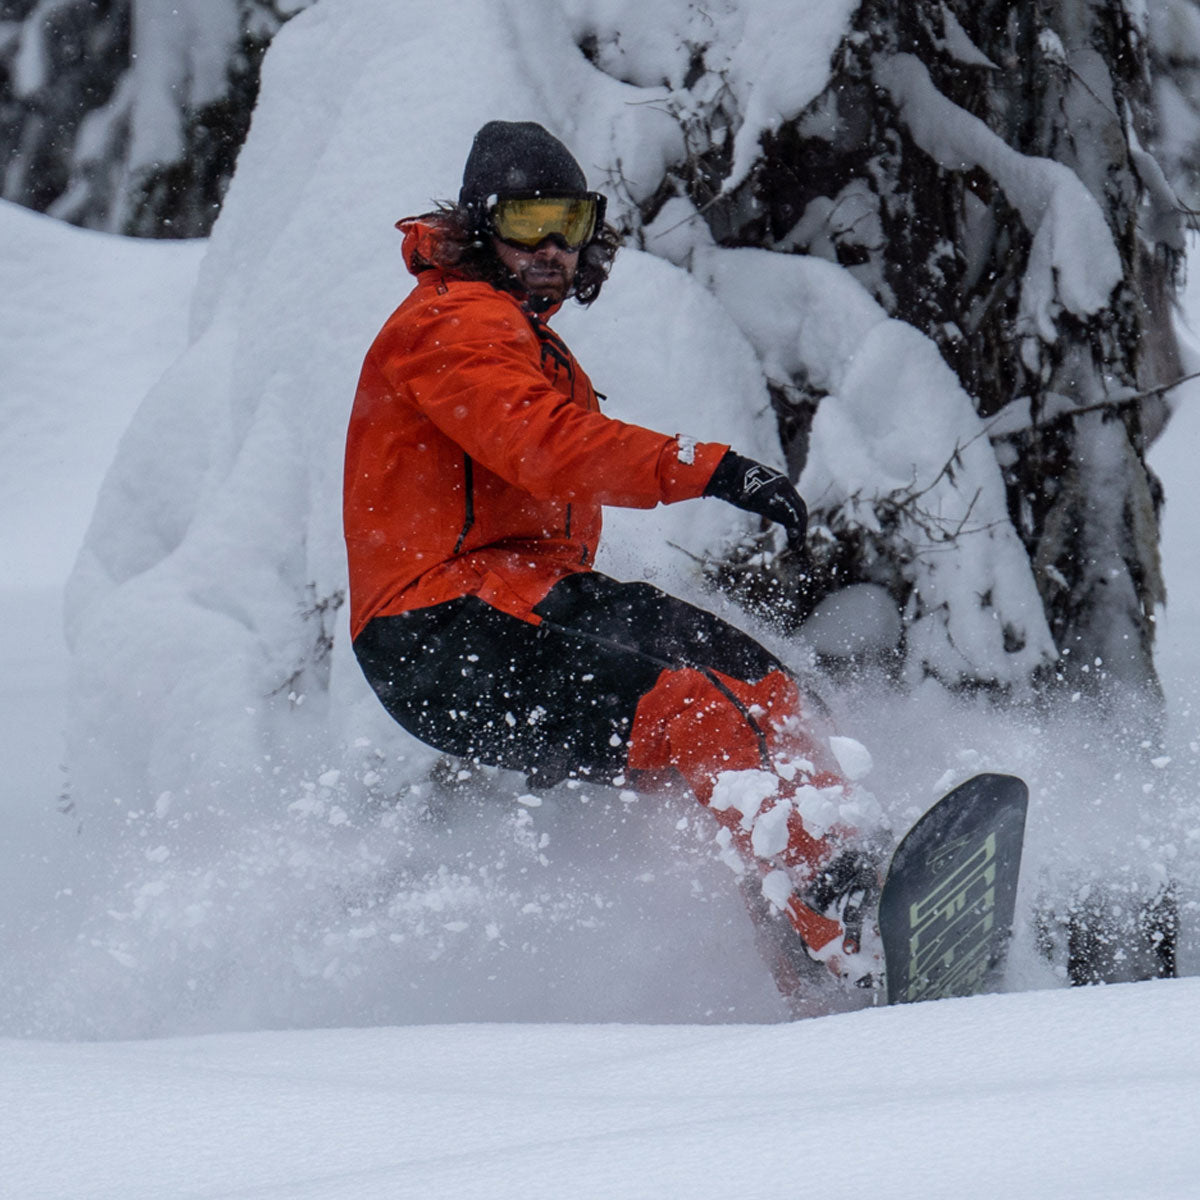 Are snowboarding jackets warm enough to snowmobile?